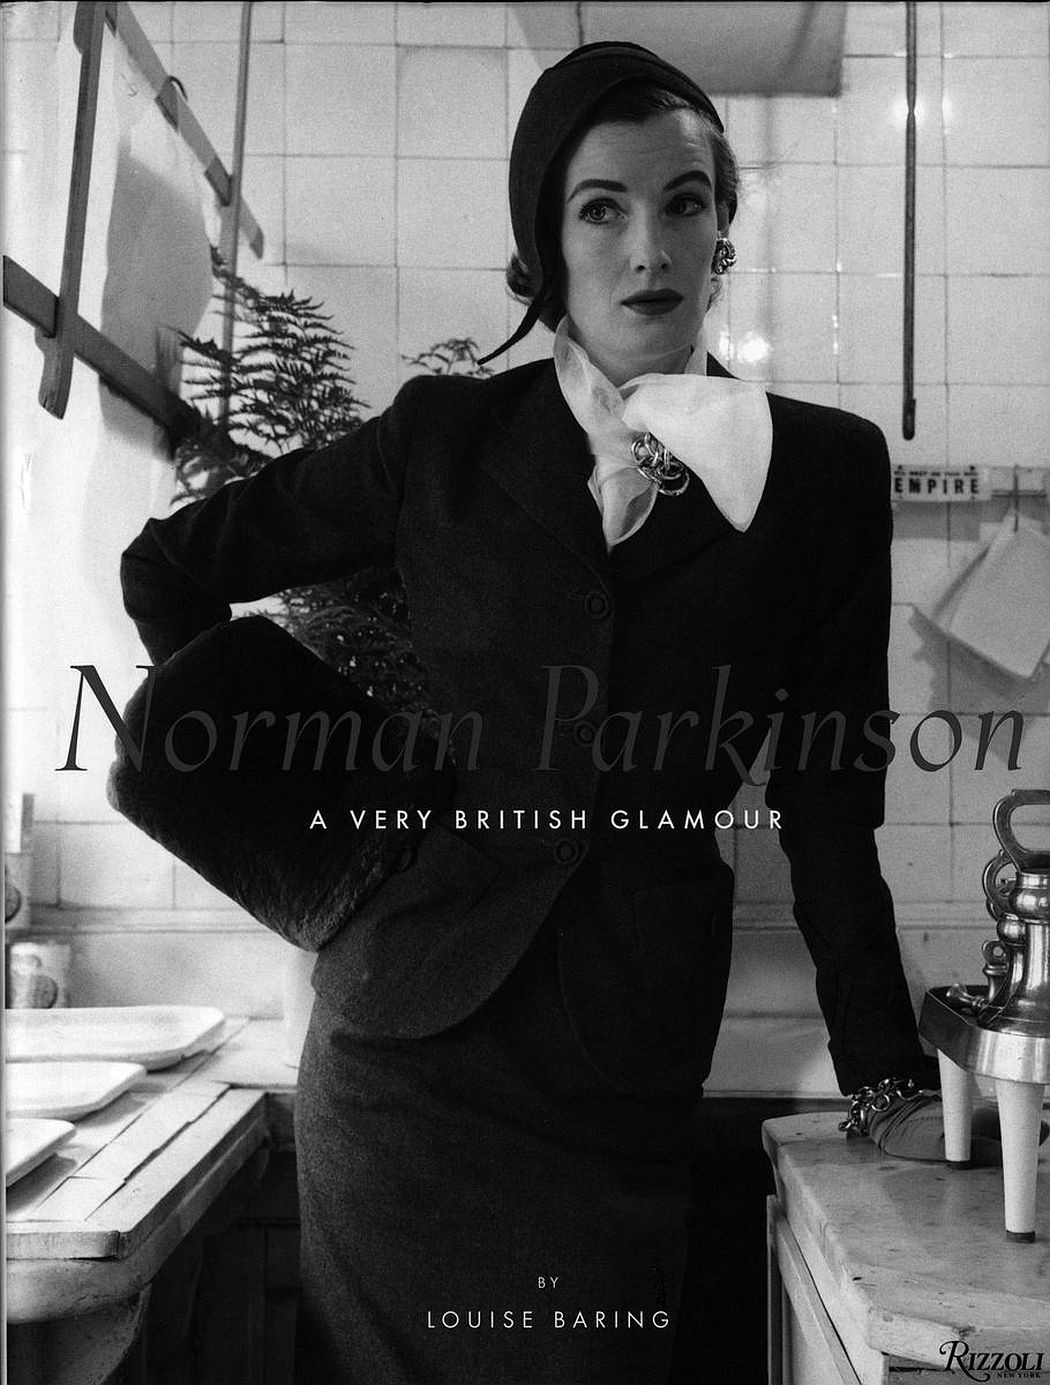 © Norman Parkinson: A Very British Glamour